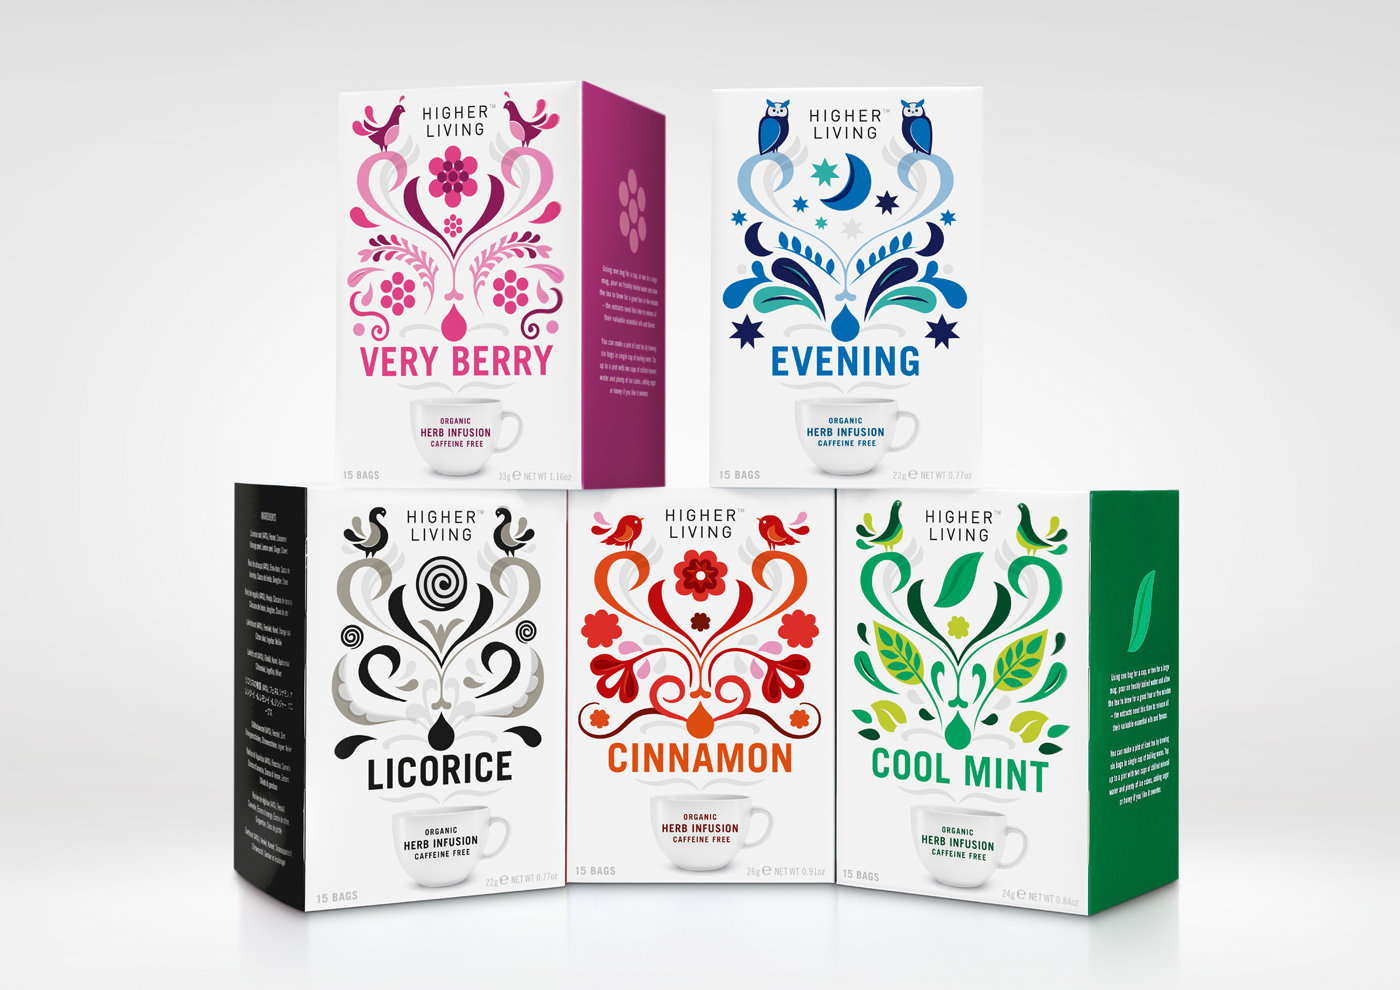 Tea packaging with illustrative detail designed by B&B Studio for UK herbal tea company brand Higher Living